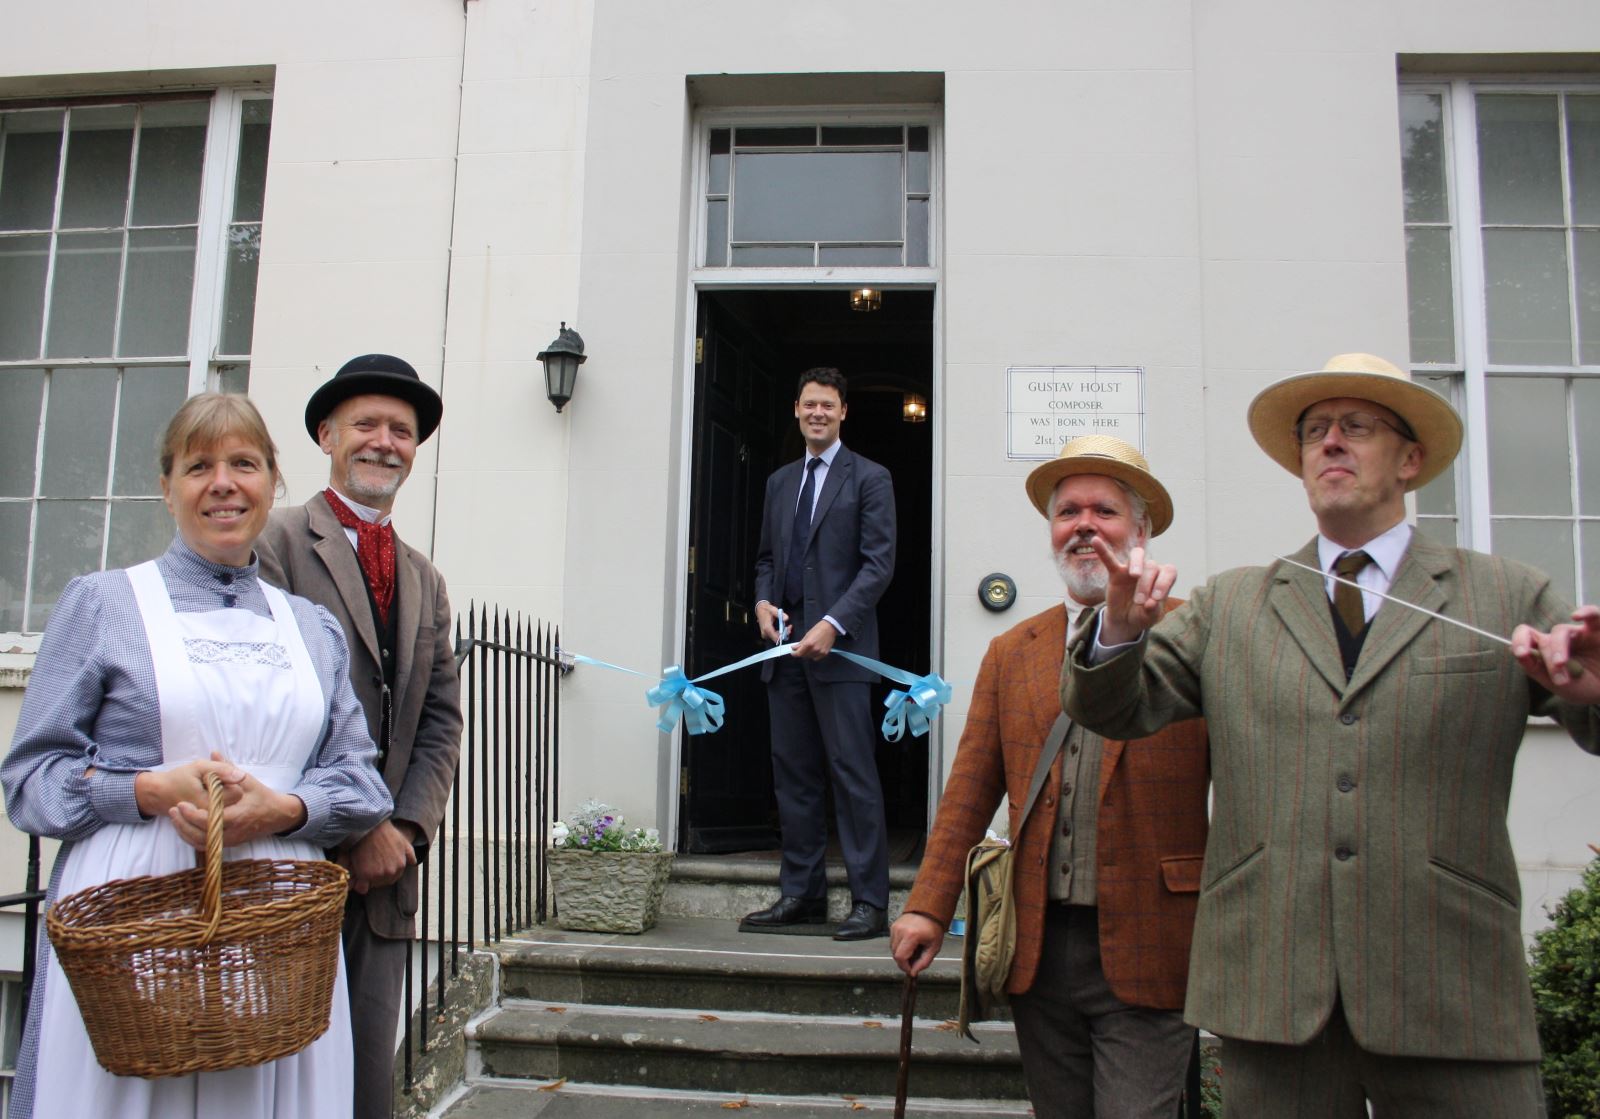 Holst birth place museum reopening celebration